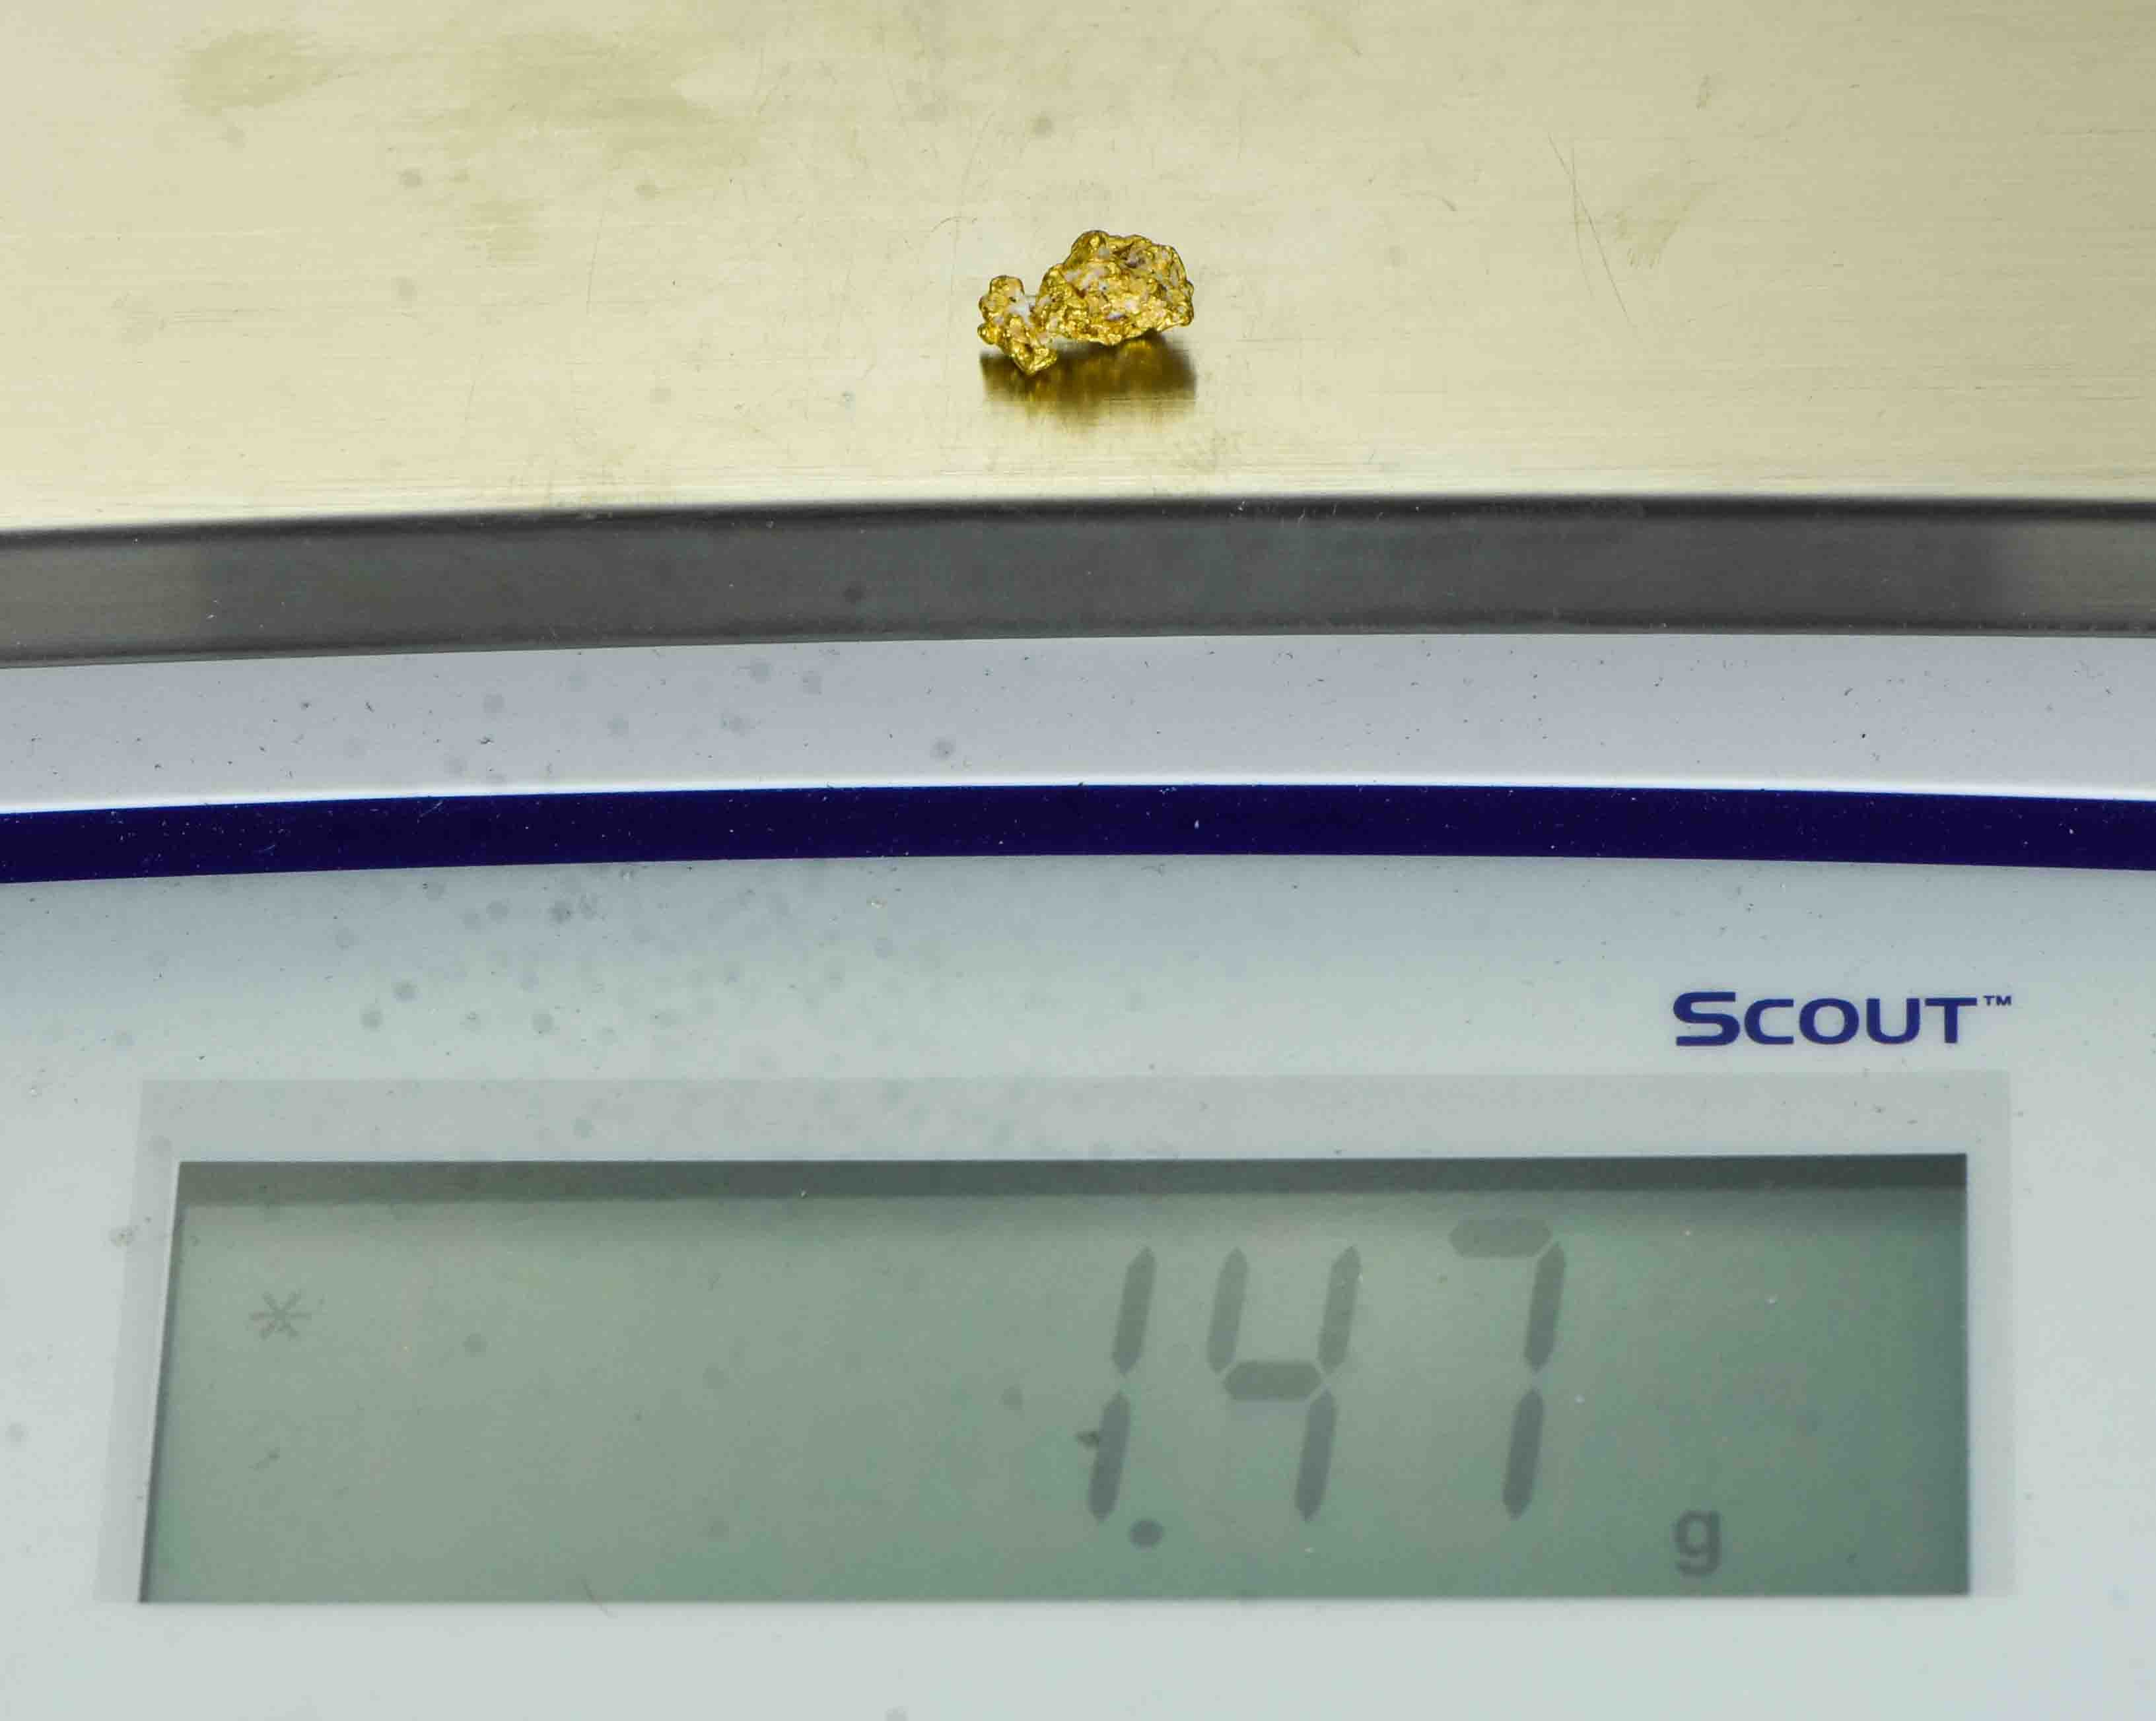 #17 Australian Natural Gold Nugget With Quartz Weighs 1.47 Grams.